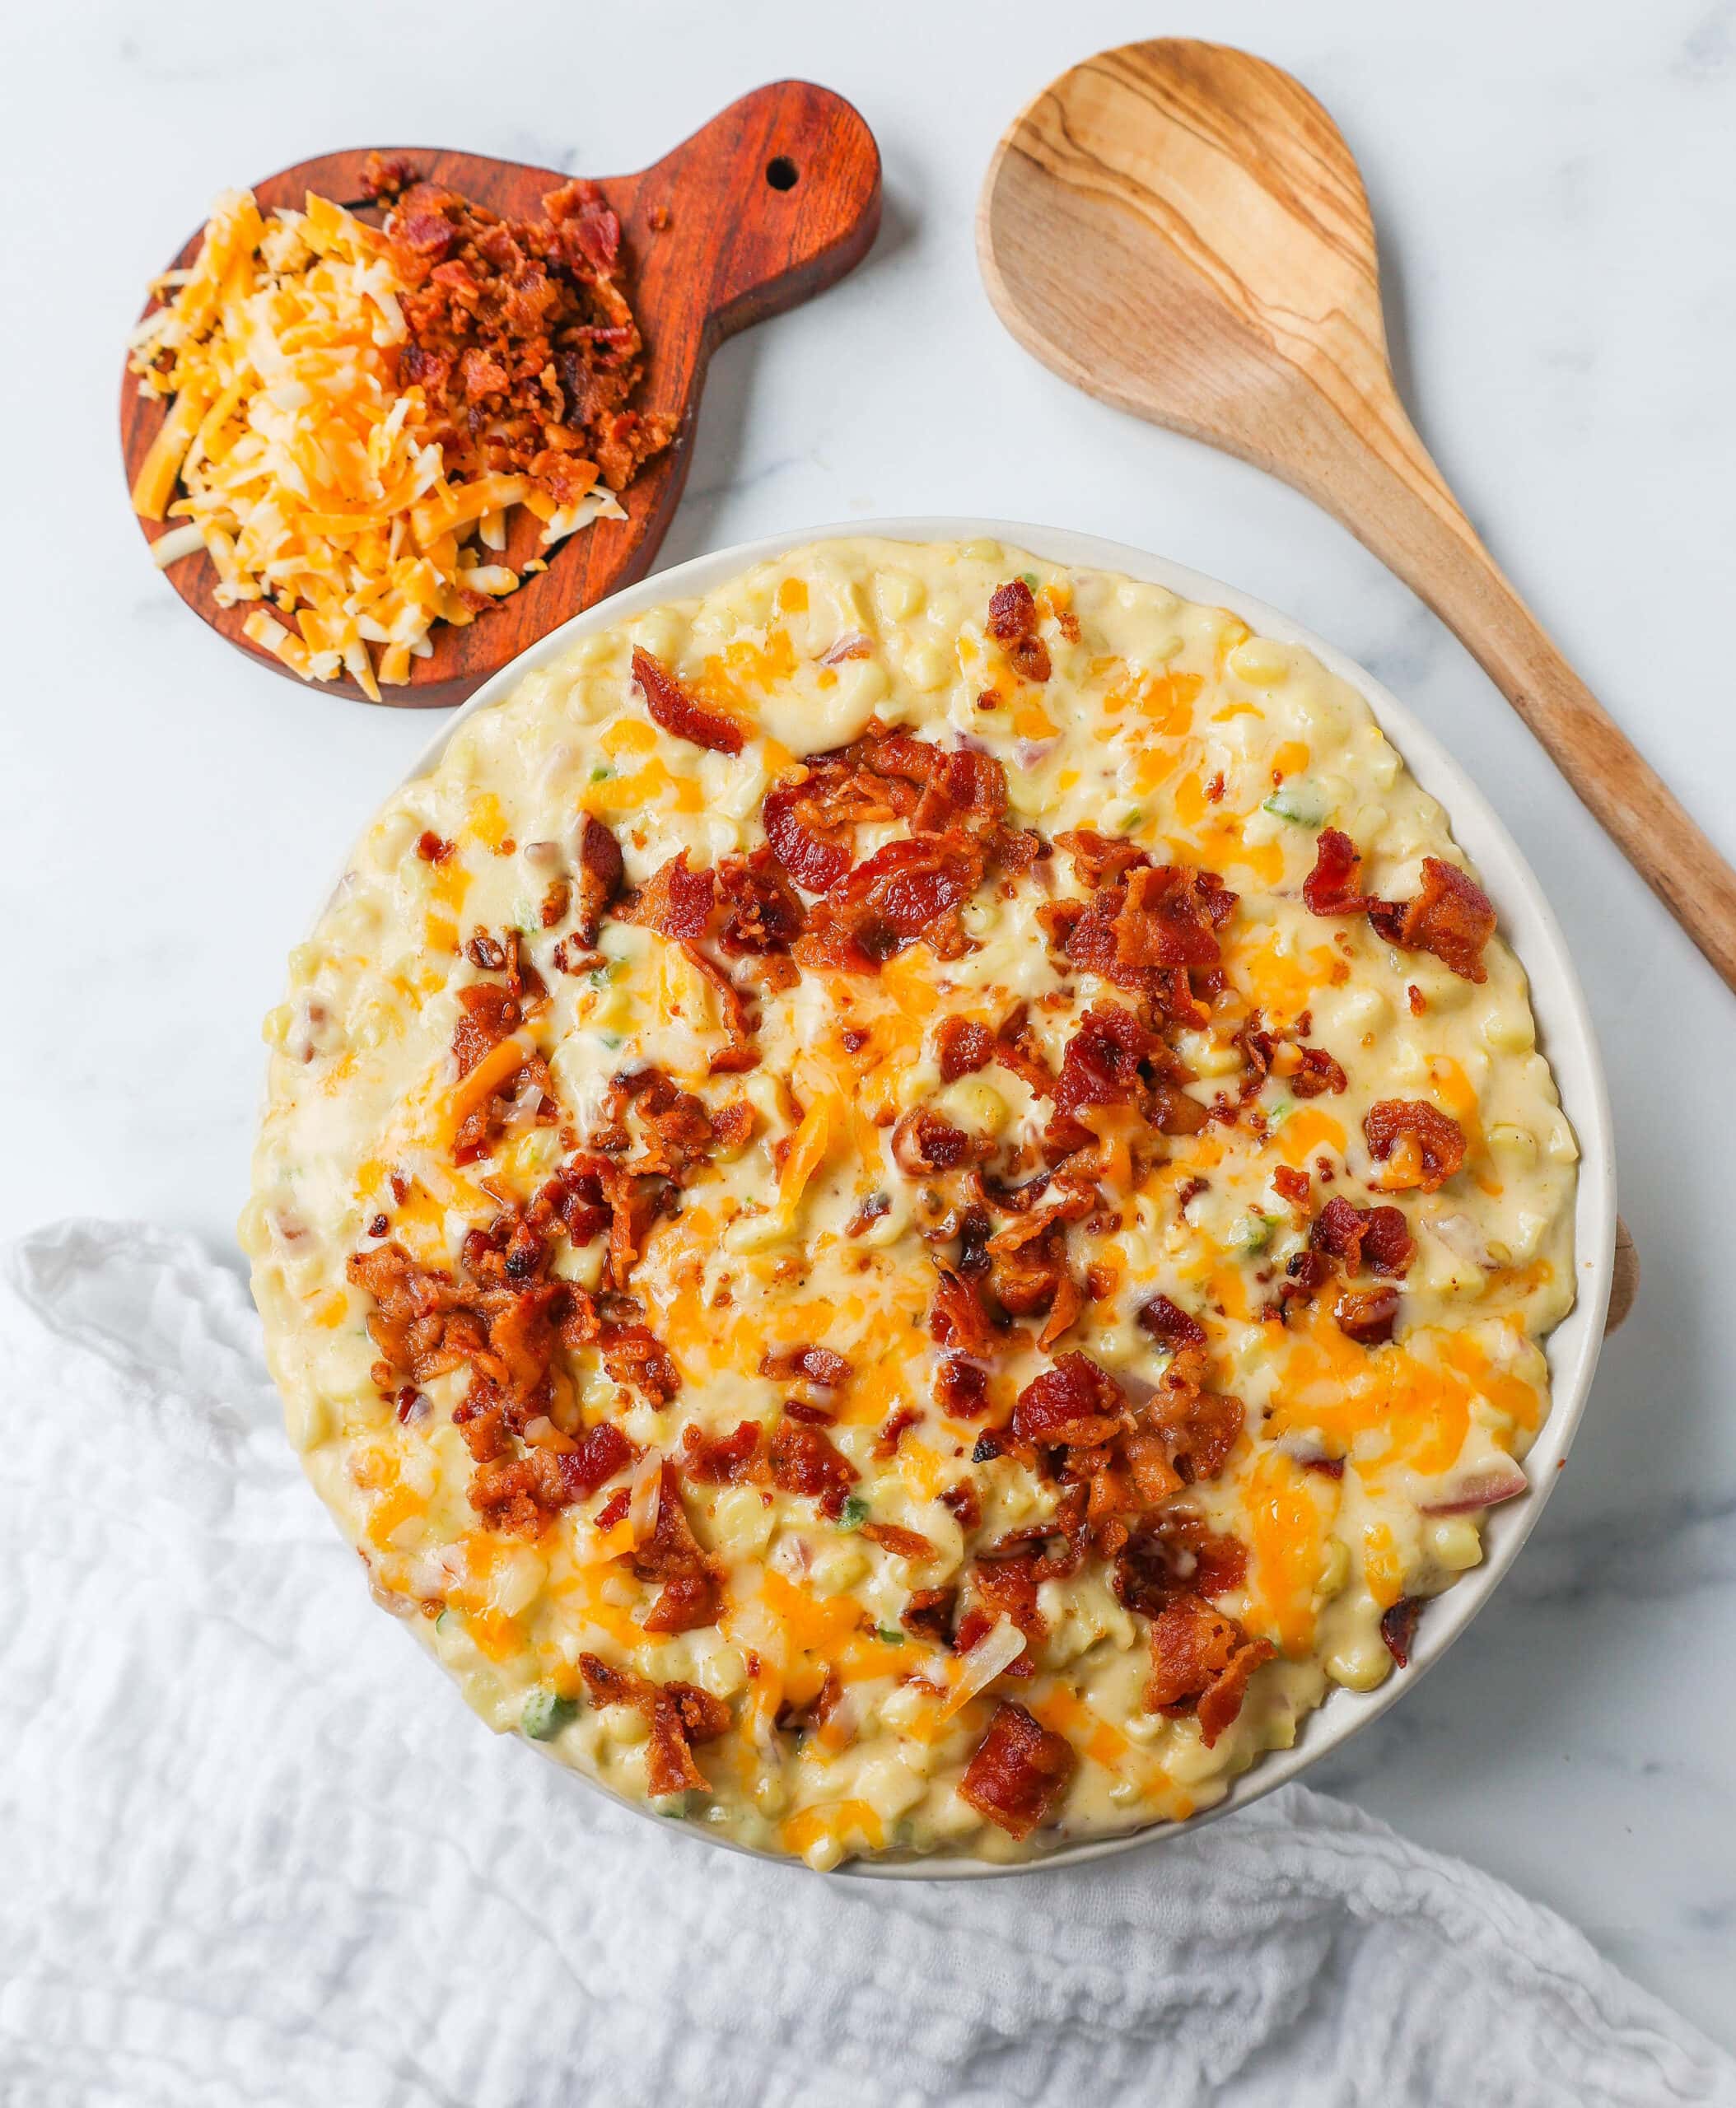 This homemade creamed corn with crispy bacon is the perfect easy side dish recipe. This is always the biggest hit at any dinner and the first vegetable side dish to be finished. 